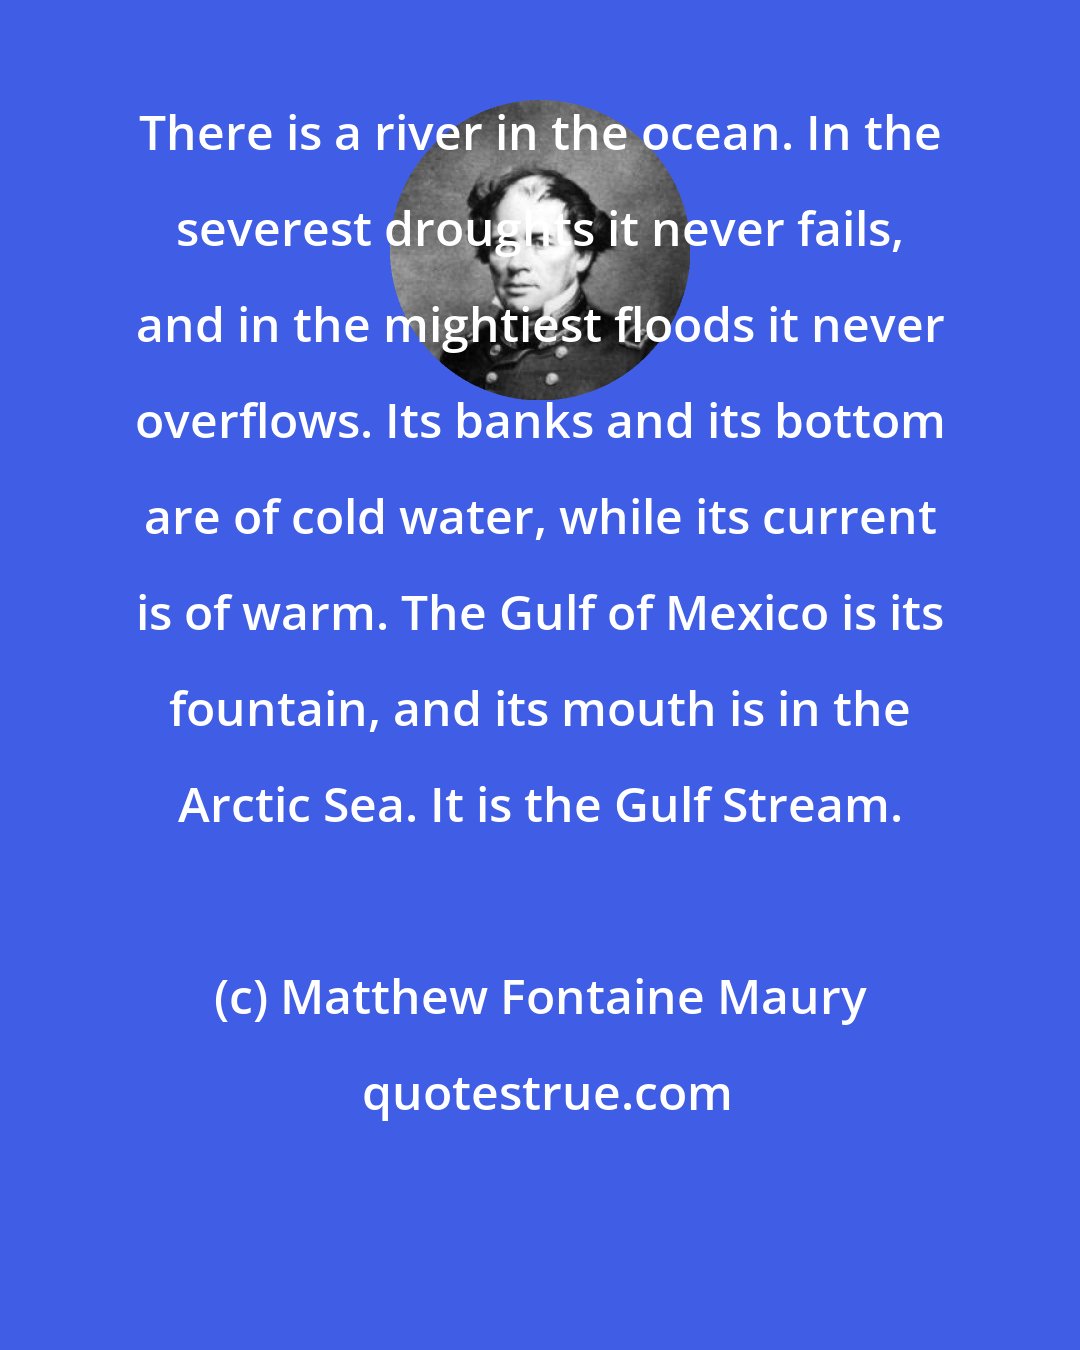 Matthew Fontaine Maury: There is a river in the ocean. In the severest droughts it never fails, and in the mightiest floods it never overflows. Its banks and its bottom are of cold water, while its current is of warm. The Gulf of Mexico is its fountain, and its mouth is in the Arctic Sea. It is the Gulf Stream.